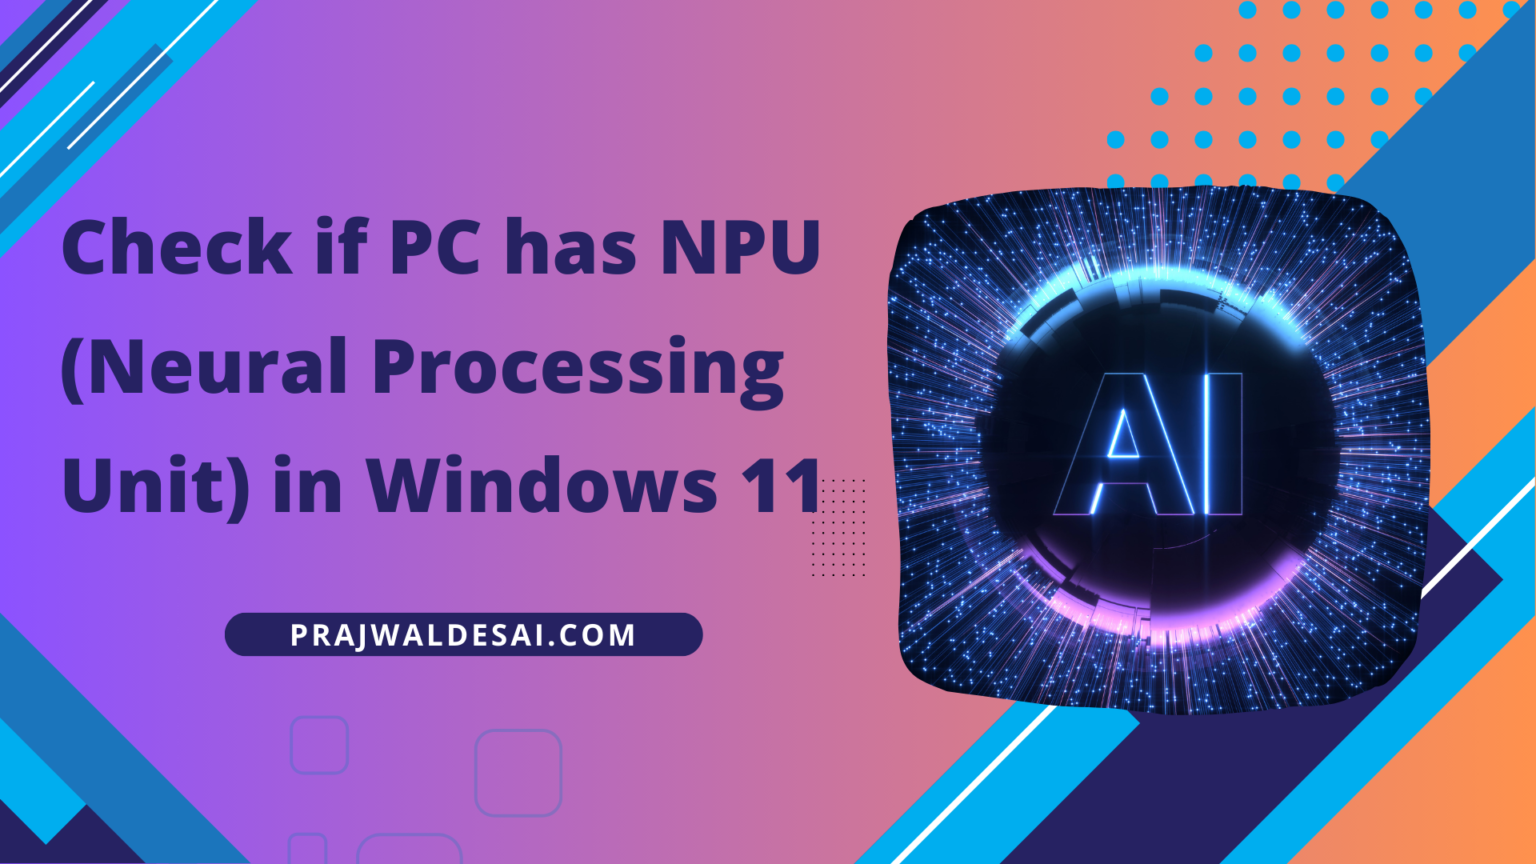 Check if PC has NPU (Neural Processing Unit) in Windows 11